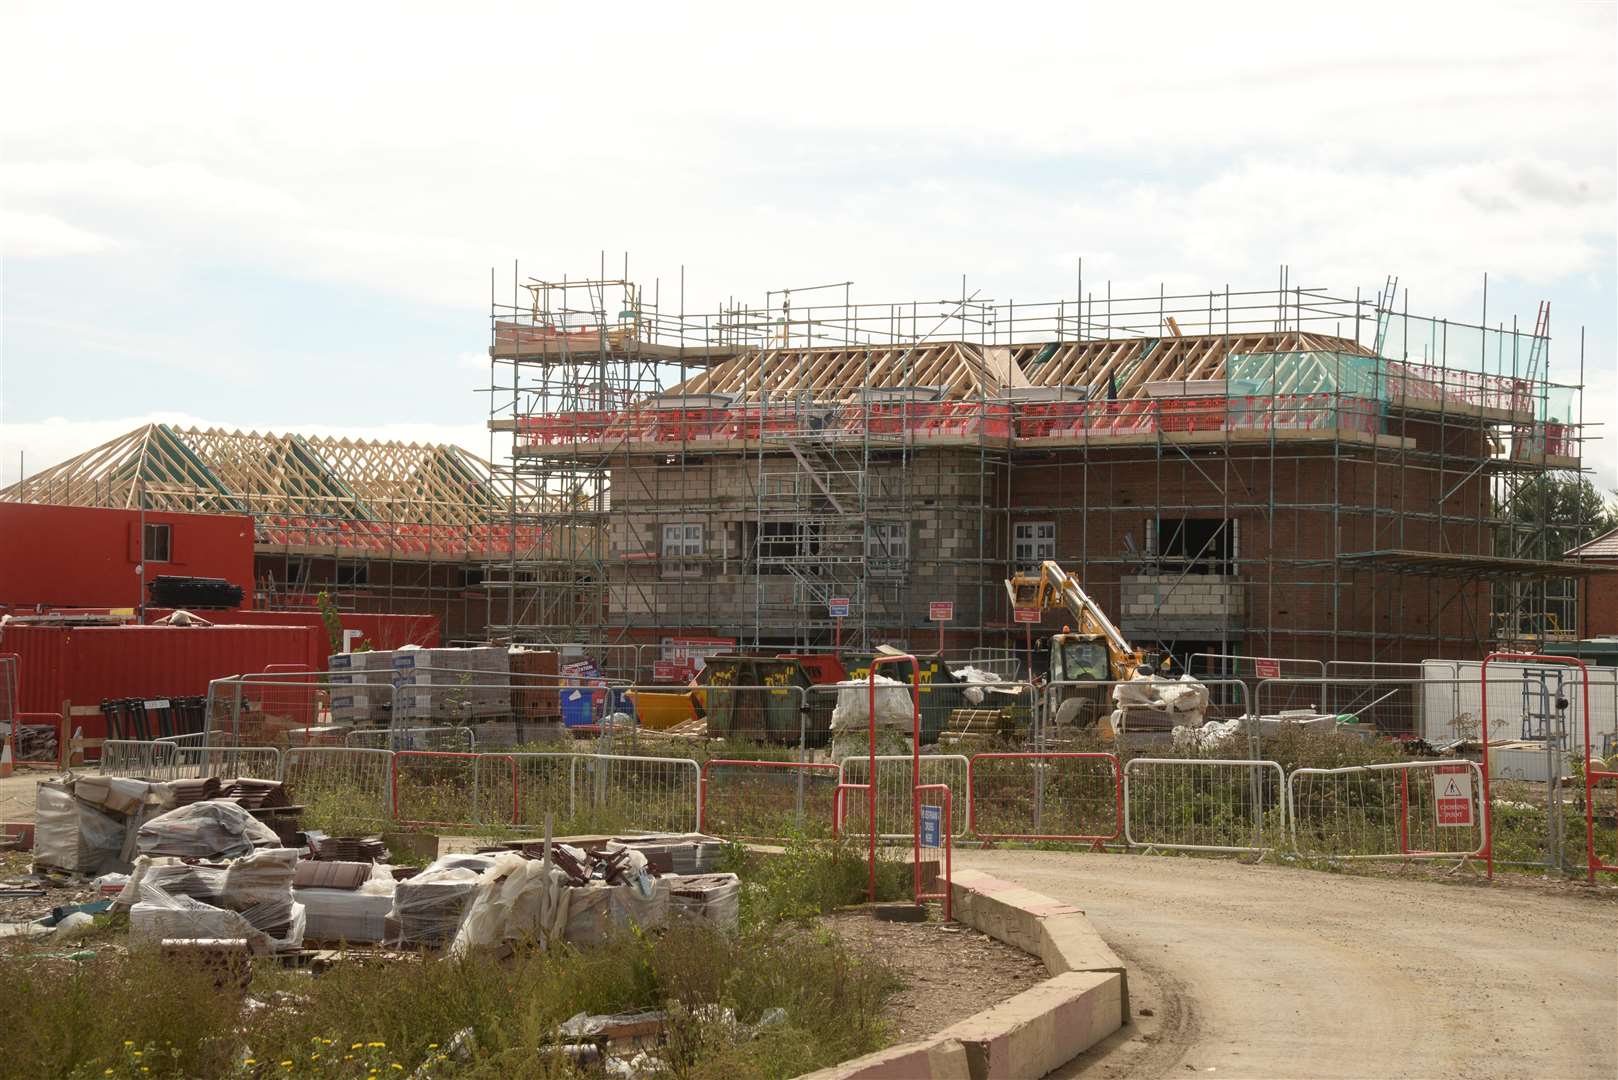 Quinn Estates is building scores of homes in Kent - including at Herne Bay's former golf club